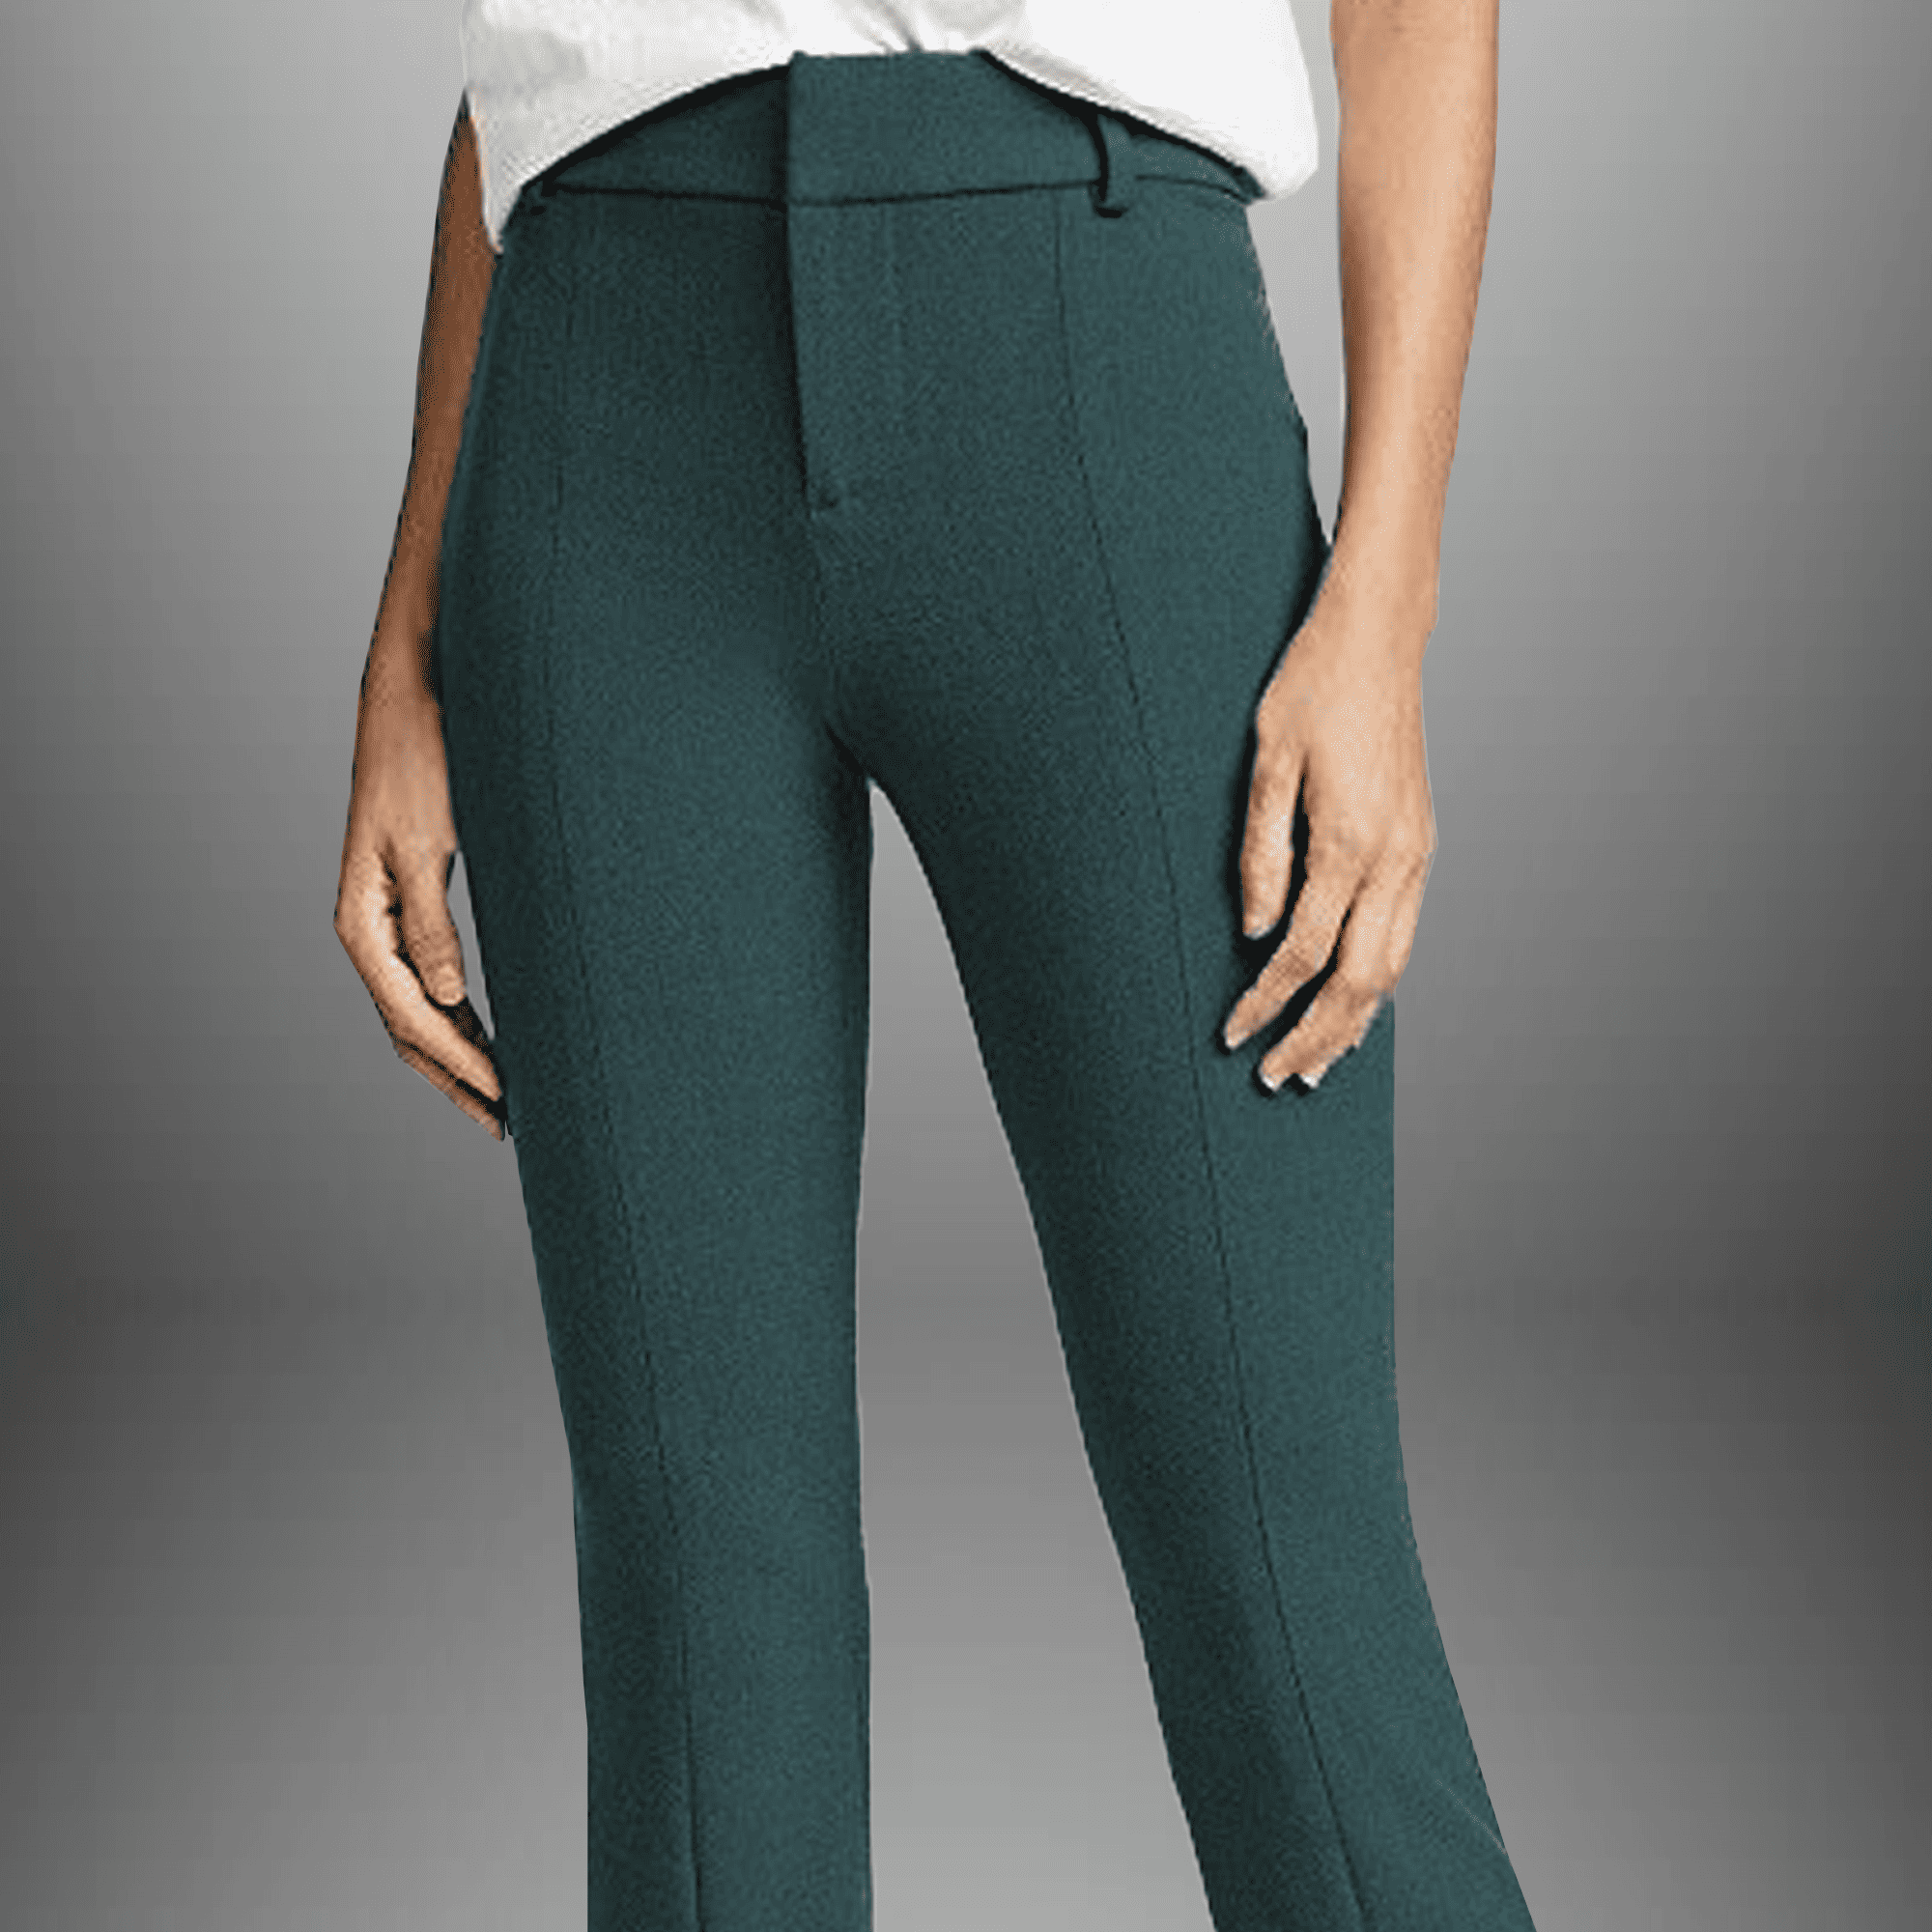 Women's front cut teal blue stretchable casual pants-RCP026